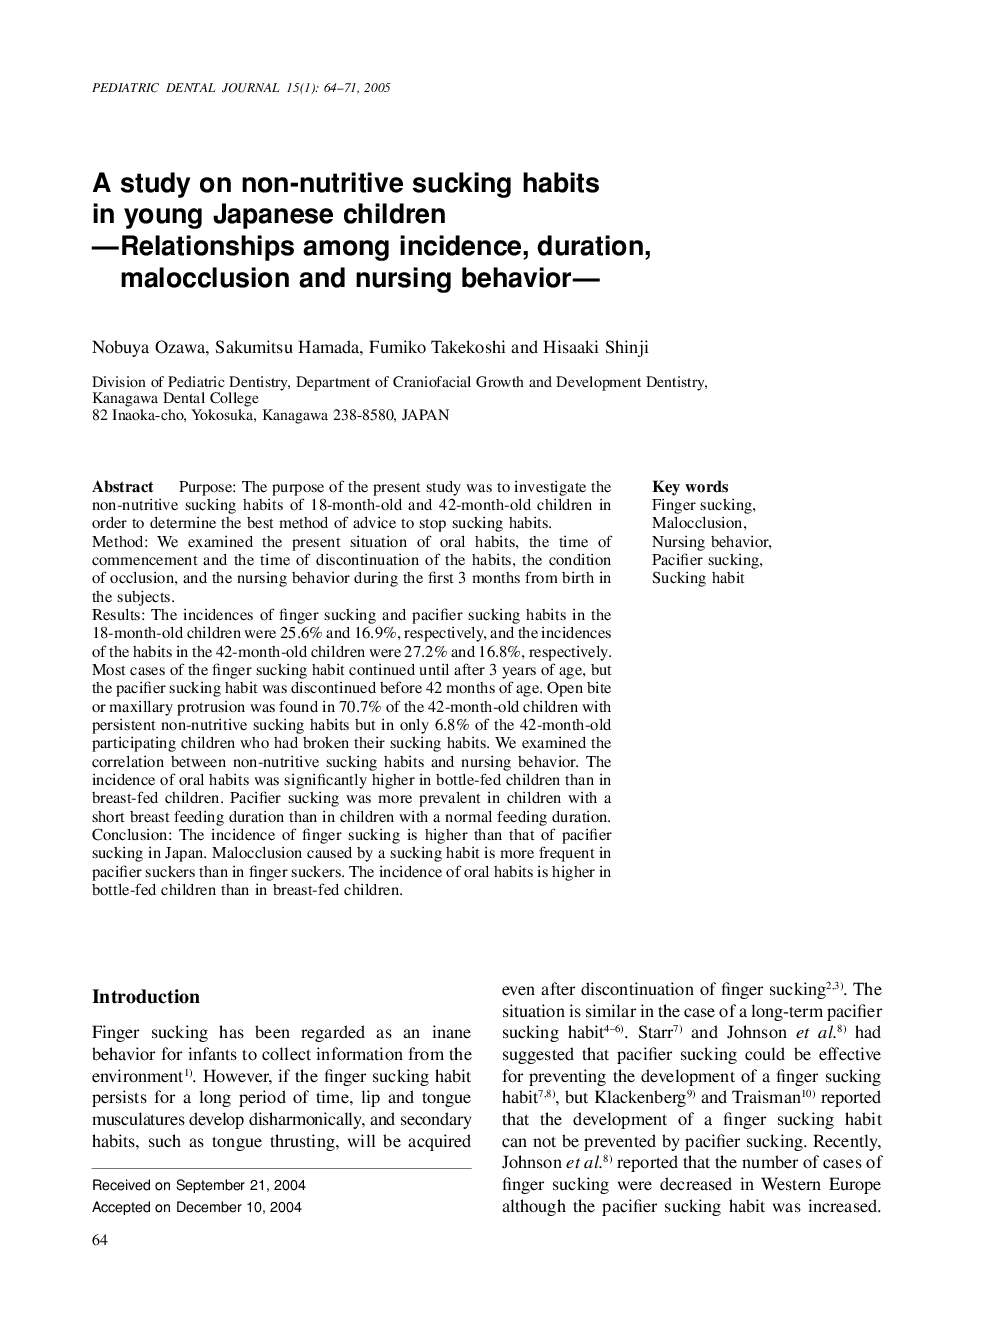 A study on non-nutritive sucking habits in young Japanese children -Relationships among incidence, duration, malocclusion and nursing behavior-